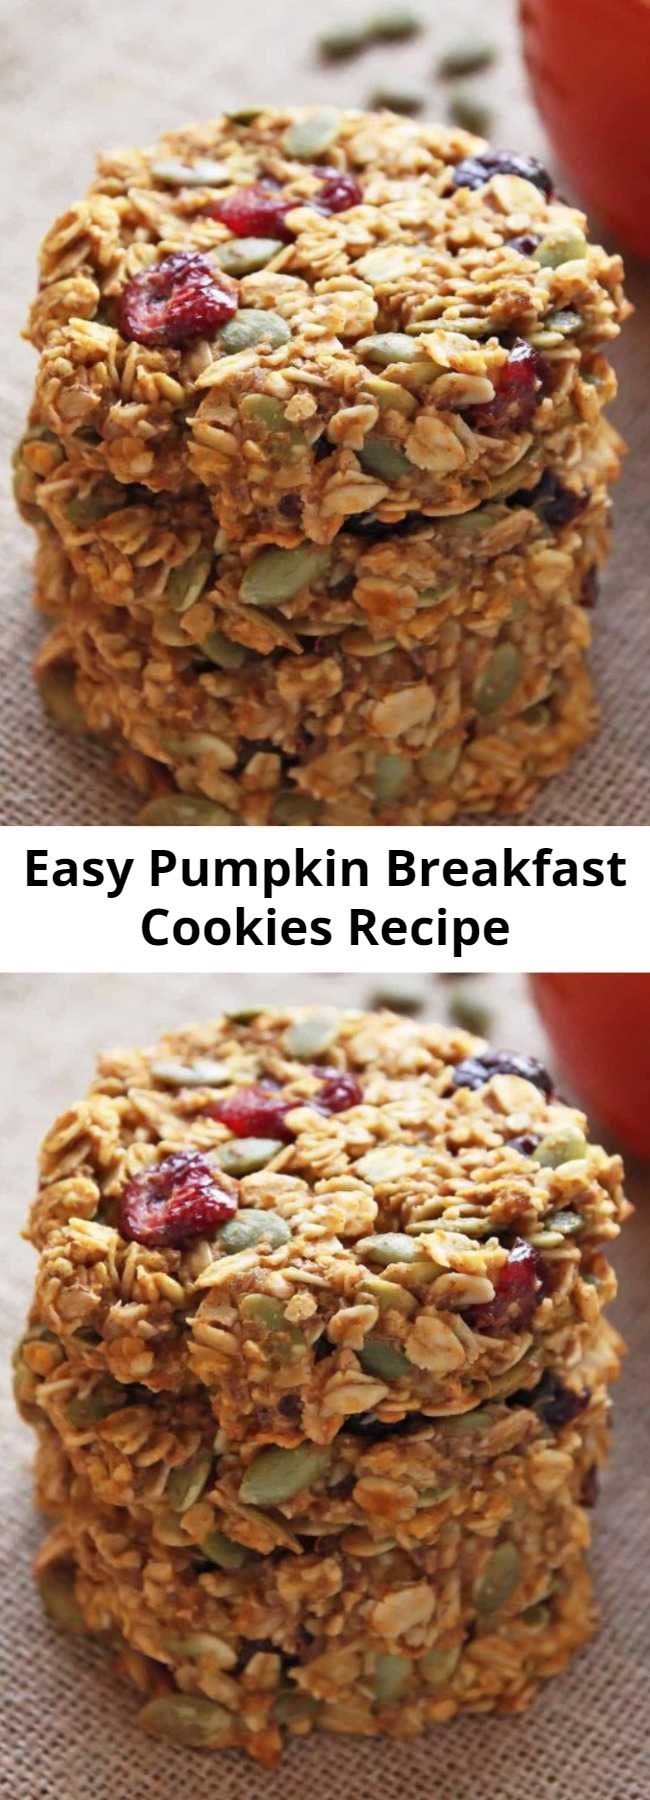 Easy Pumpkin Breakfast Cookies Recipe - These healthy Pumpkin Breakfast Cookies make a nutritious and grab-and-go breakfast that tastes like fall! This gluten-free and clean eating breakfast treat is made with wholegrain oats, cranberries, pumpkin seeds and honey.